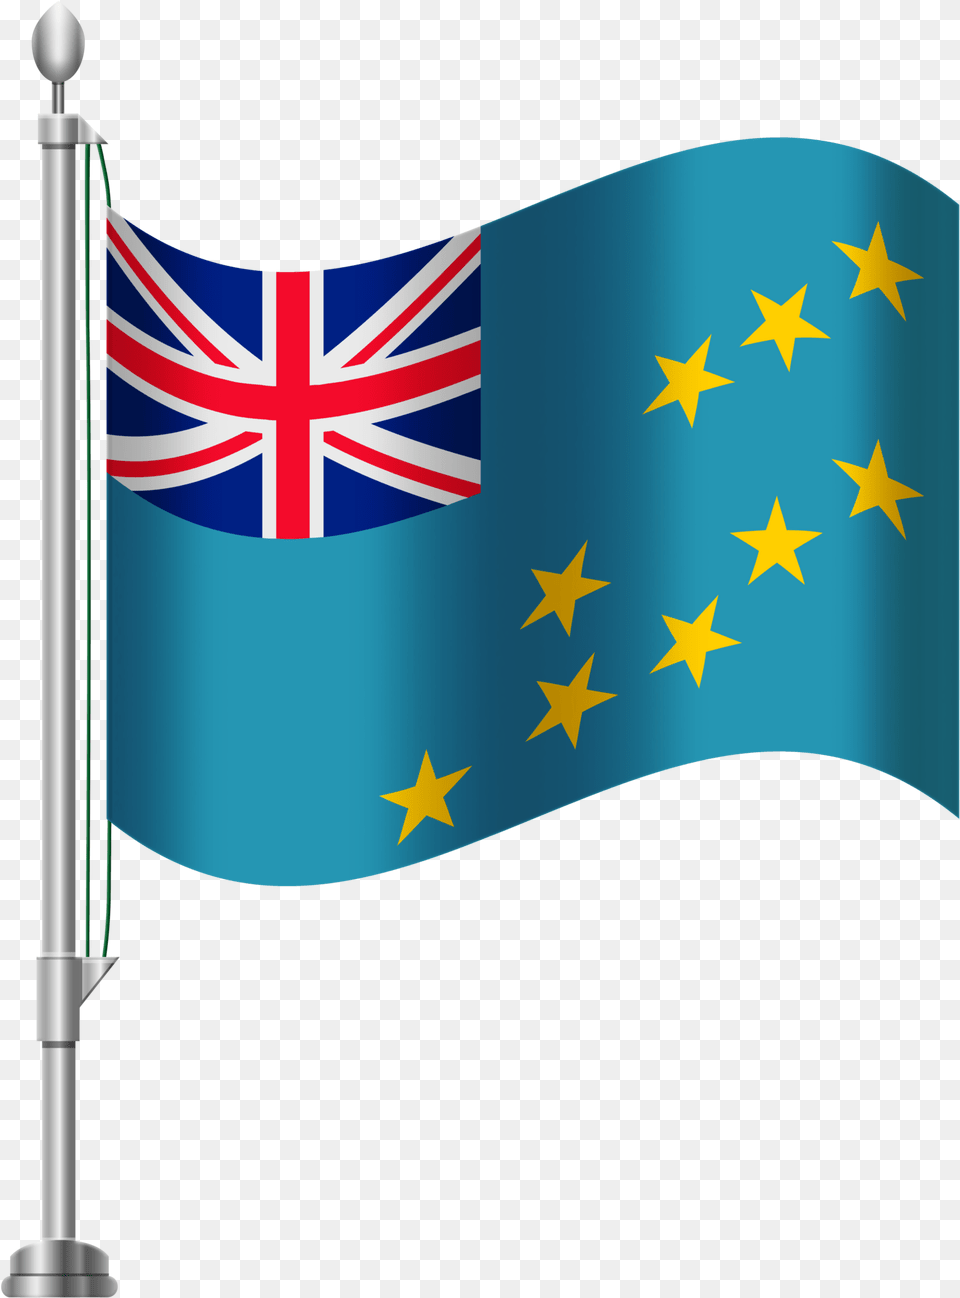 This File Is About Tuvalu Flag British Flag With Eu Stars Free Png